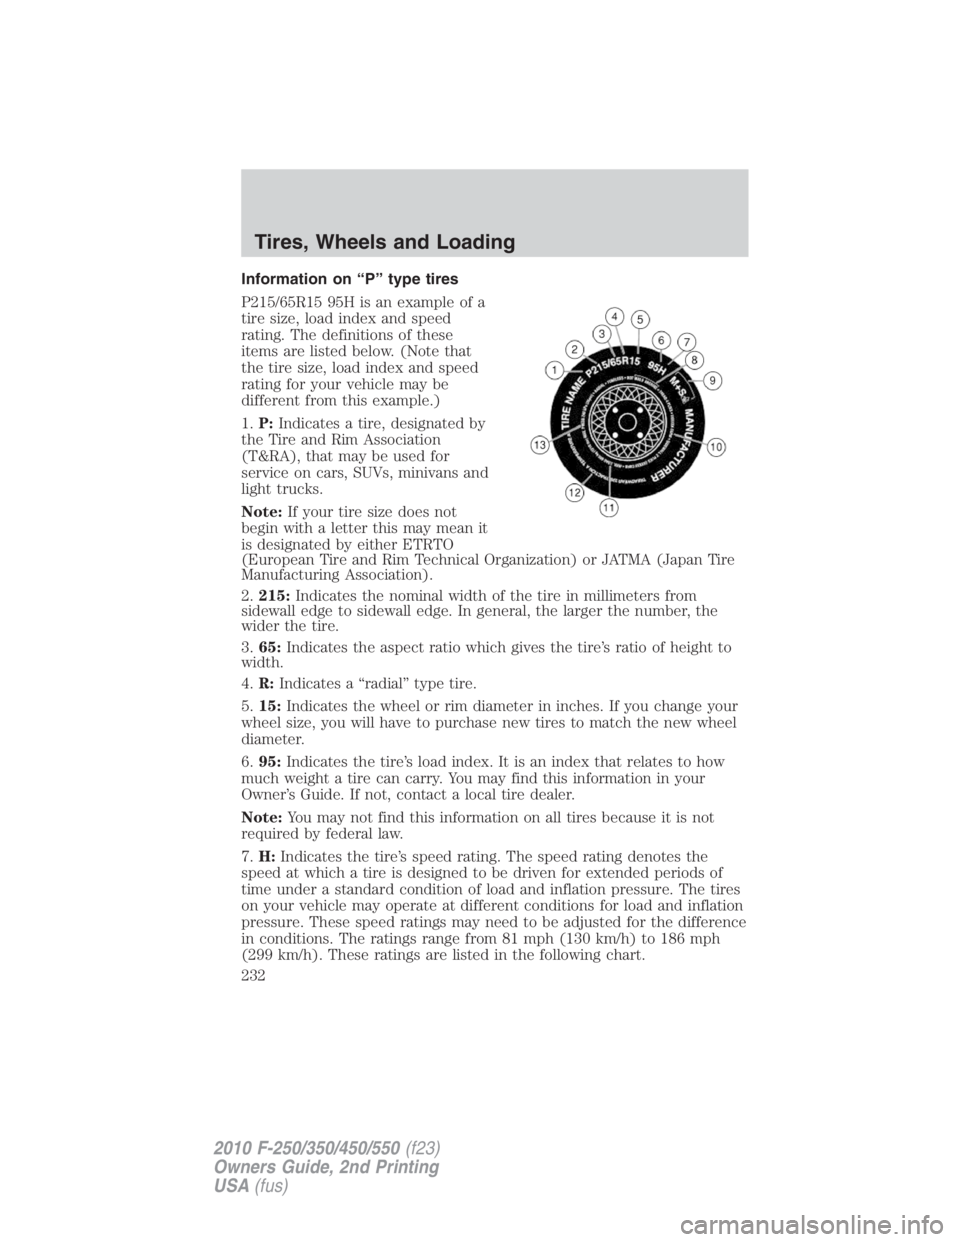 FORD F450 2010  Owners Manual Information on “P” type tires
P215/65R15 95H is an example of a
tire size, load index and speed
rating. The definitions of these
items are listed below. (Note that
the tire size, load index and sp